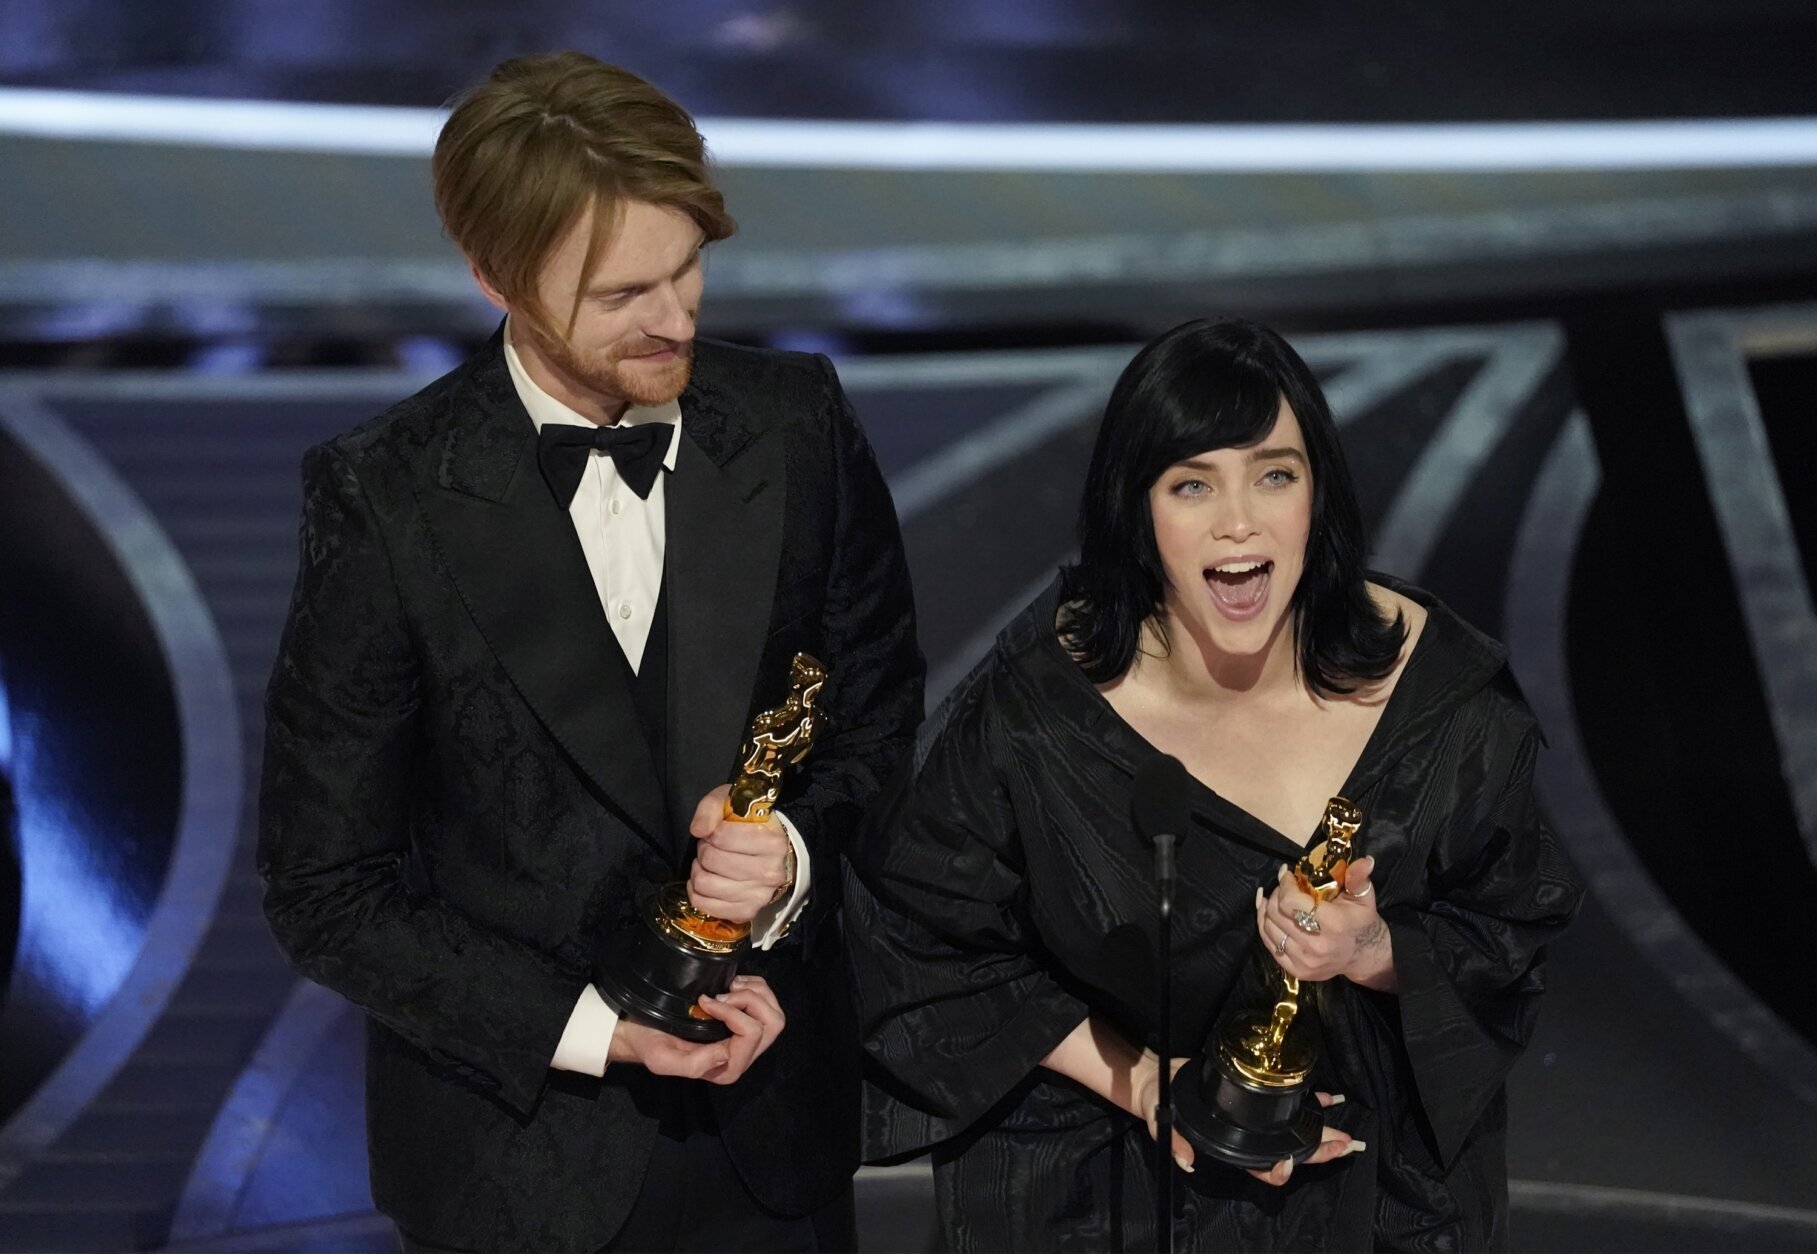 Billie Eilish, right, and Finneas O'Connell accept the award for best original song for "No Time To Die" from "No Time To Die" at the Oscars on Sunday, March 27, 2022, at the Dolby Theatre in Los Angeles. (AP Photo/Chris Pizzello)